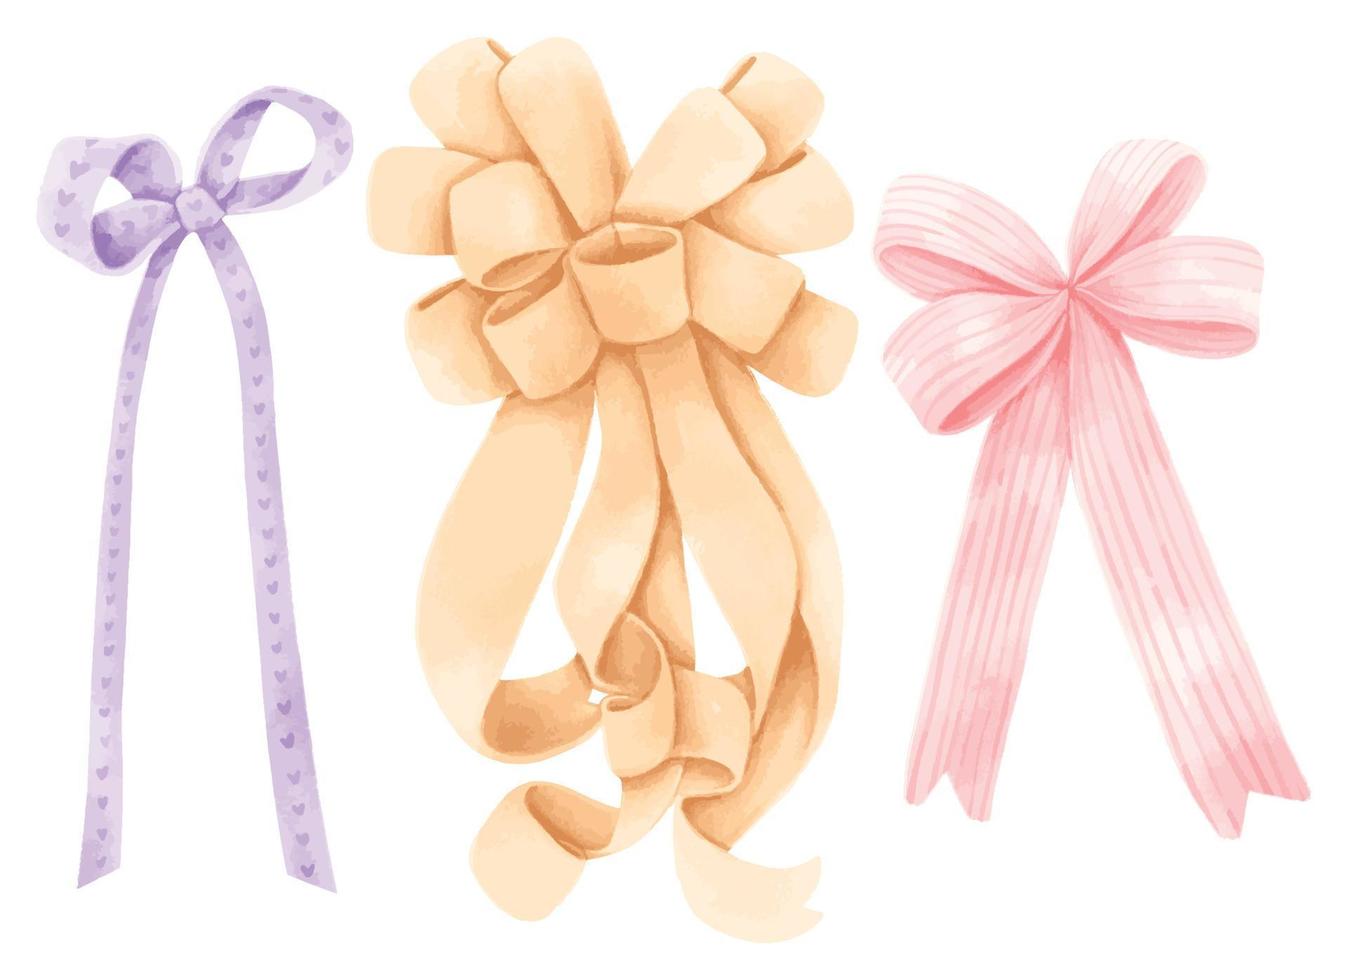 Set of gift ribbons bow illustrations hand painted watercolor styles vector